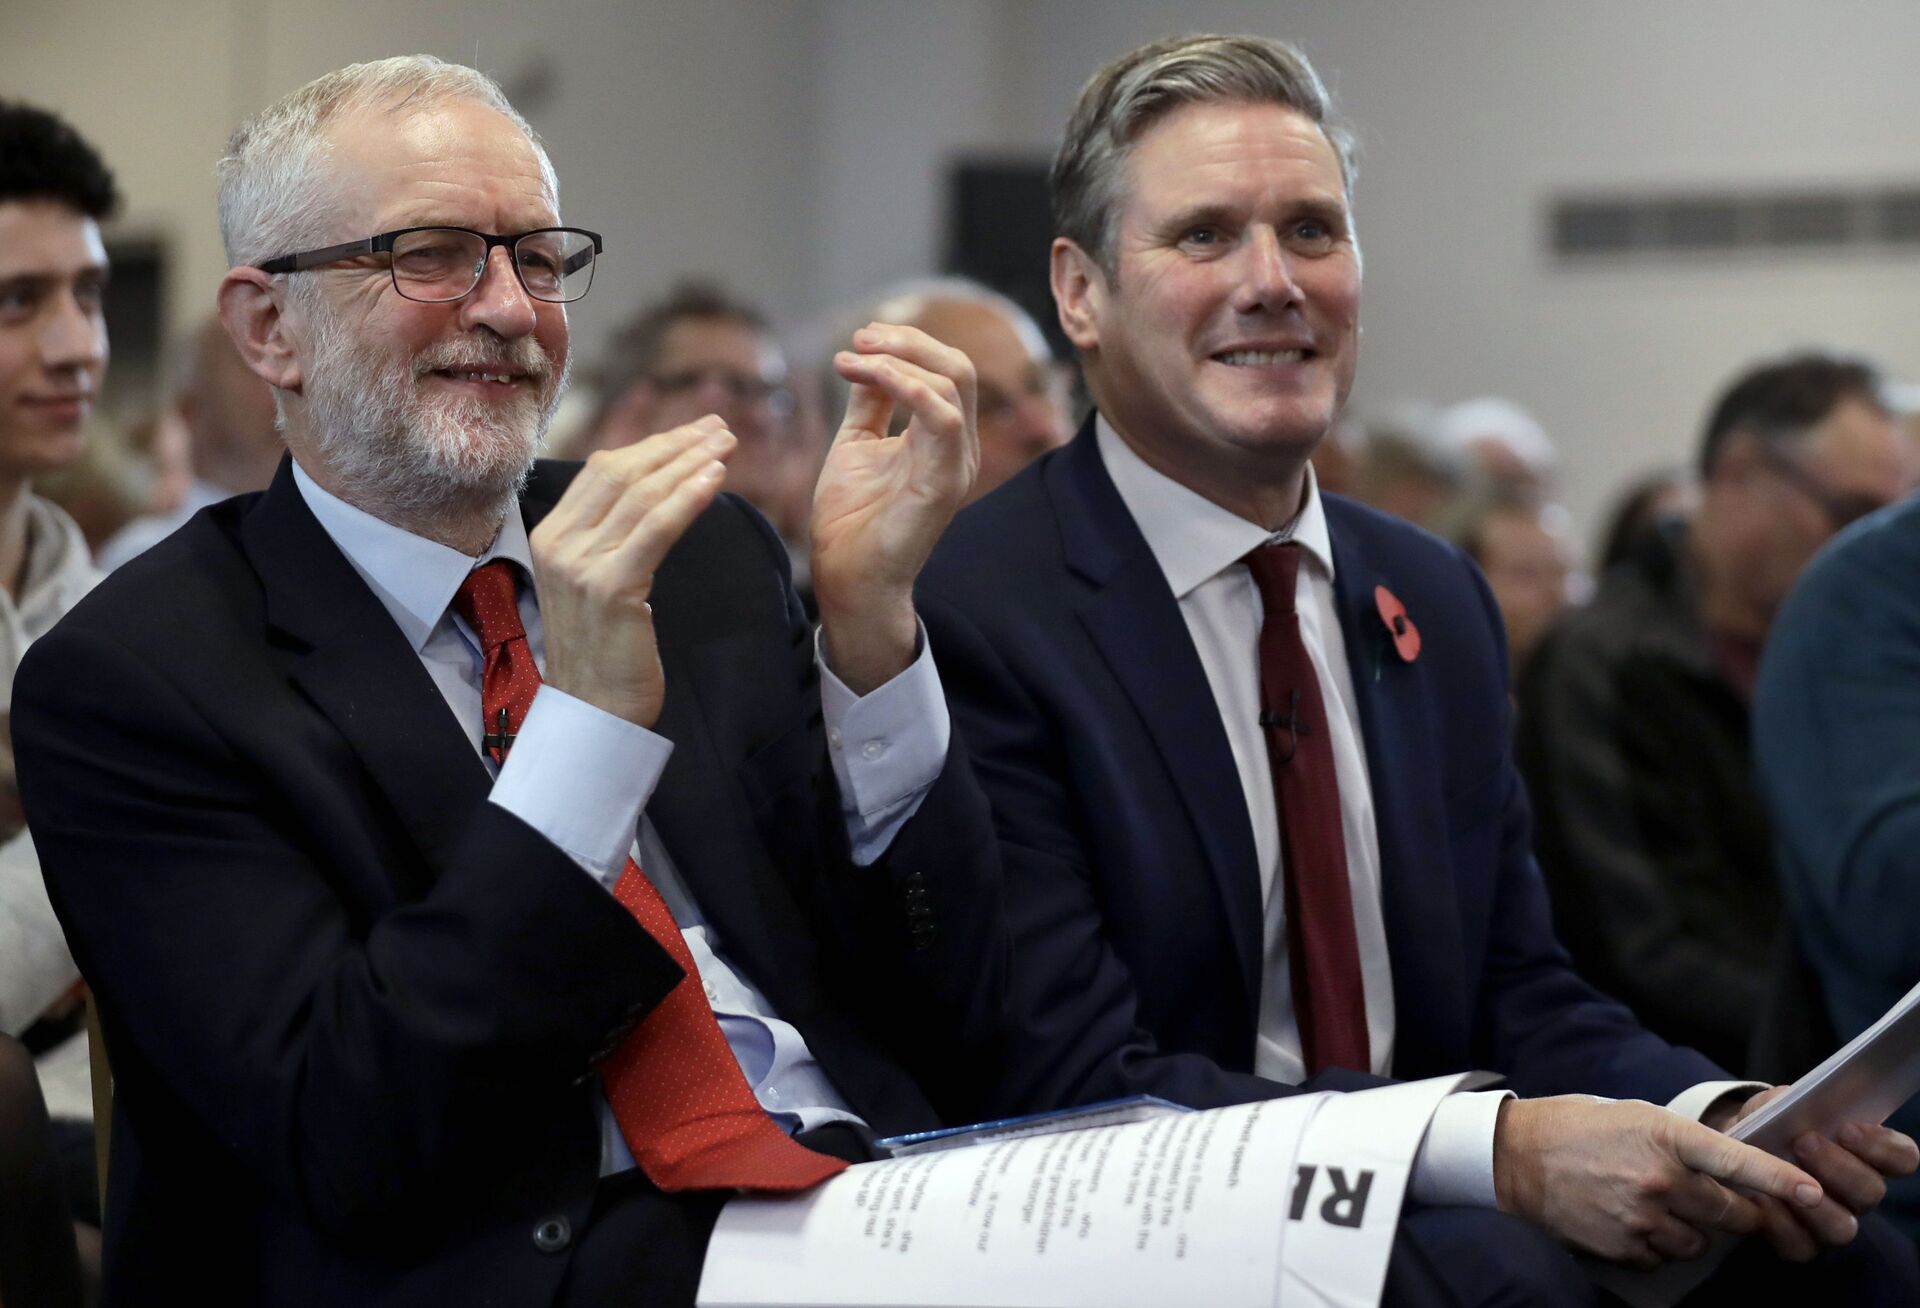 UK Labour Leader Starmer to Reportedly Issue ‘Call to Arms Like in 1945' in Major Strategy Speech  - Sputnik International, 1920, 18.02.2021